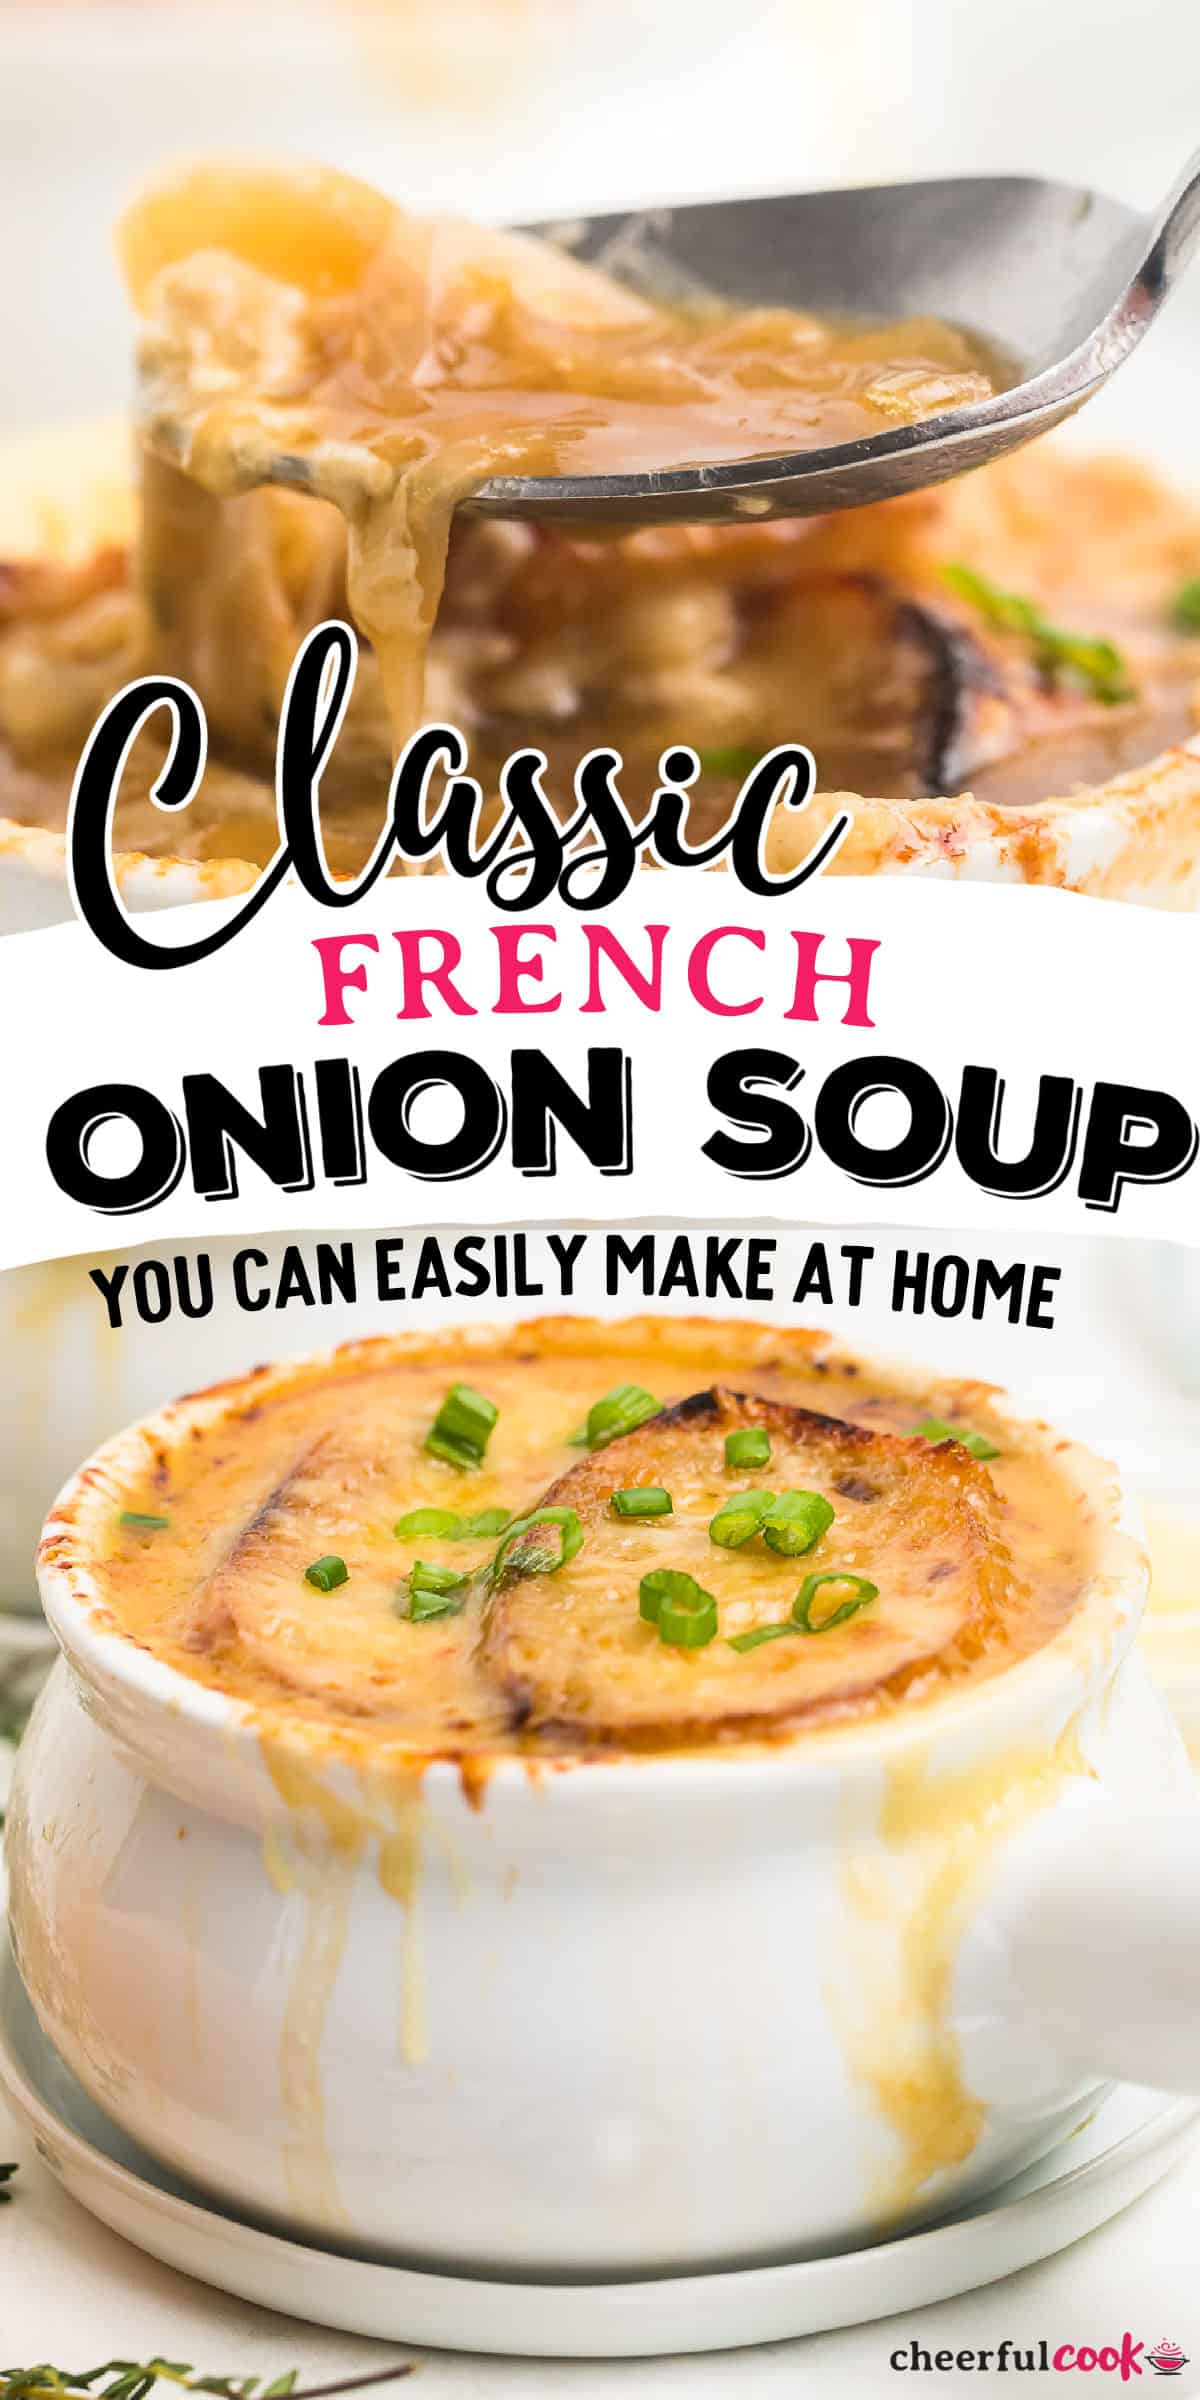 This easy French Onion Soup recipe is made with perfectly caramelized onions in a flavorful beef broth topped with crusty bread and melty cheese. It will warm you right up! #cheerfulcook #frenchonion #soup #recipe #easy via @cheerfulcook